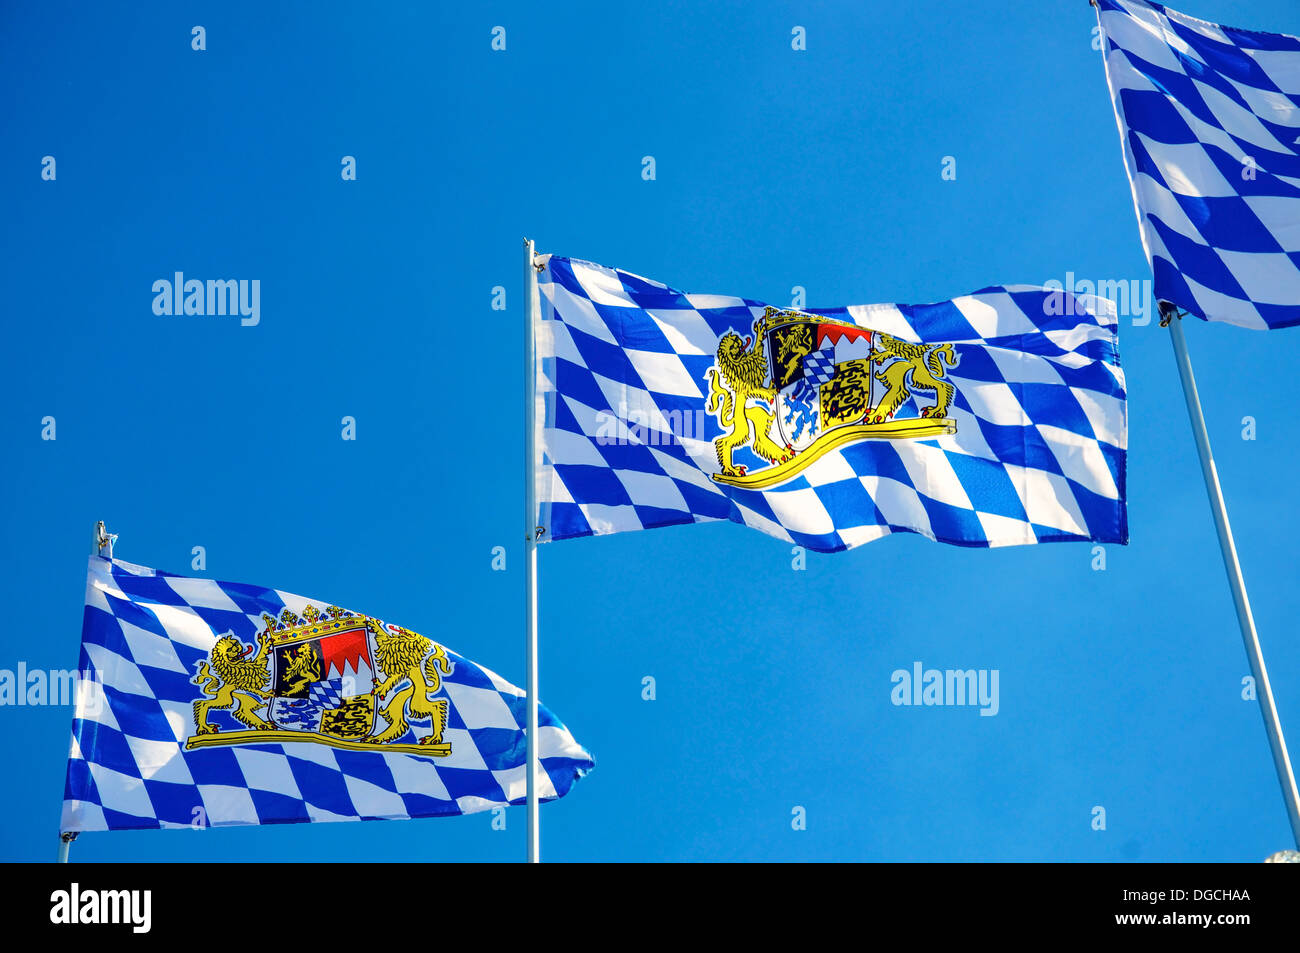 Flags of Bavaria (Germany) waving in the wind Stock Photo